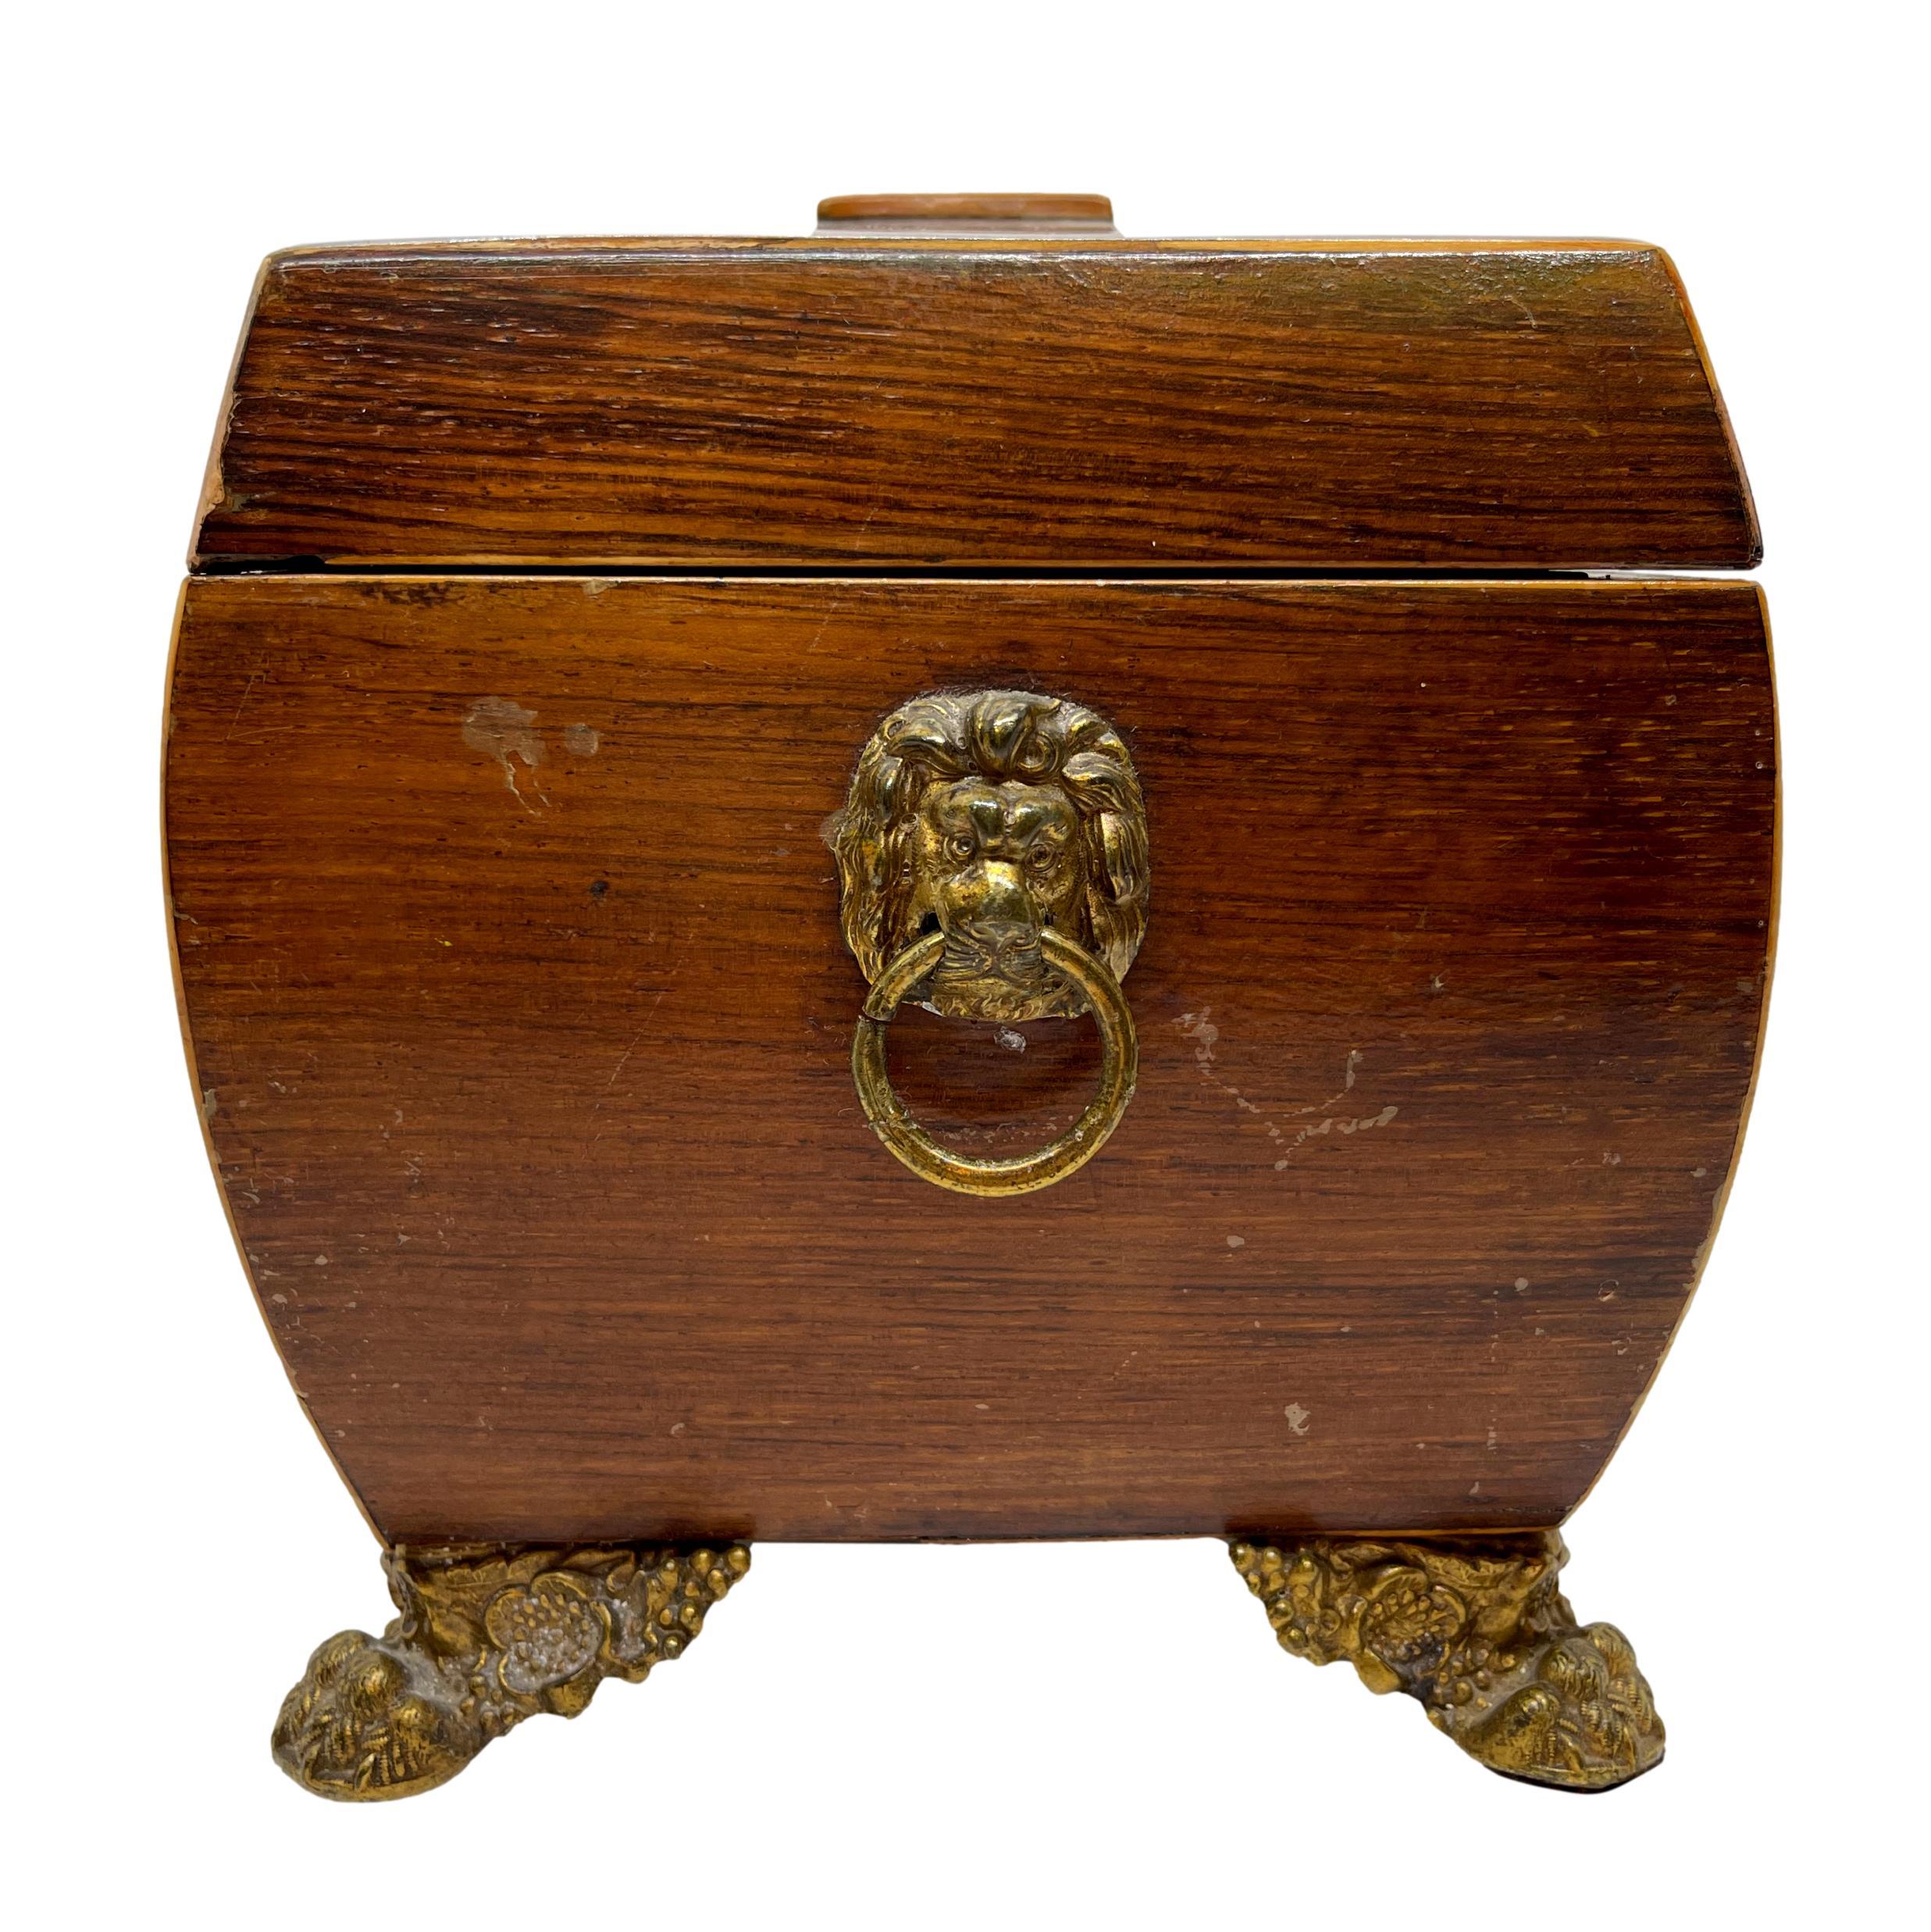 William IV rosewood and satinwood-banded tea caddy, English, ca. 1835, of sarcophagus shape, with lion mask ring pulls to either side, the fitted interior with two lidded tea compartments and space for the mixing bowl (not present), on molded brass